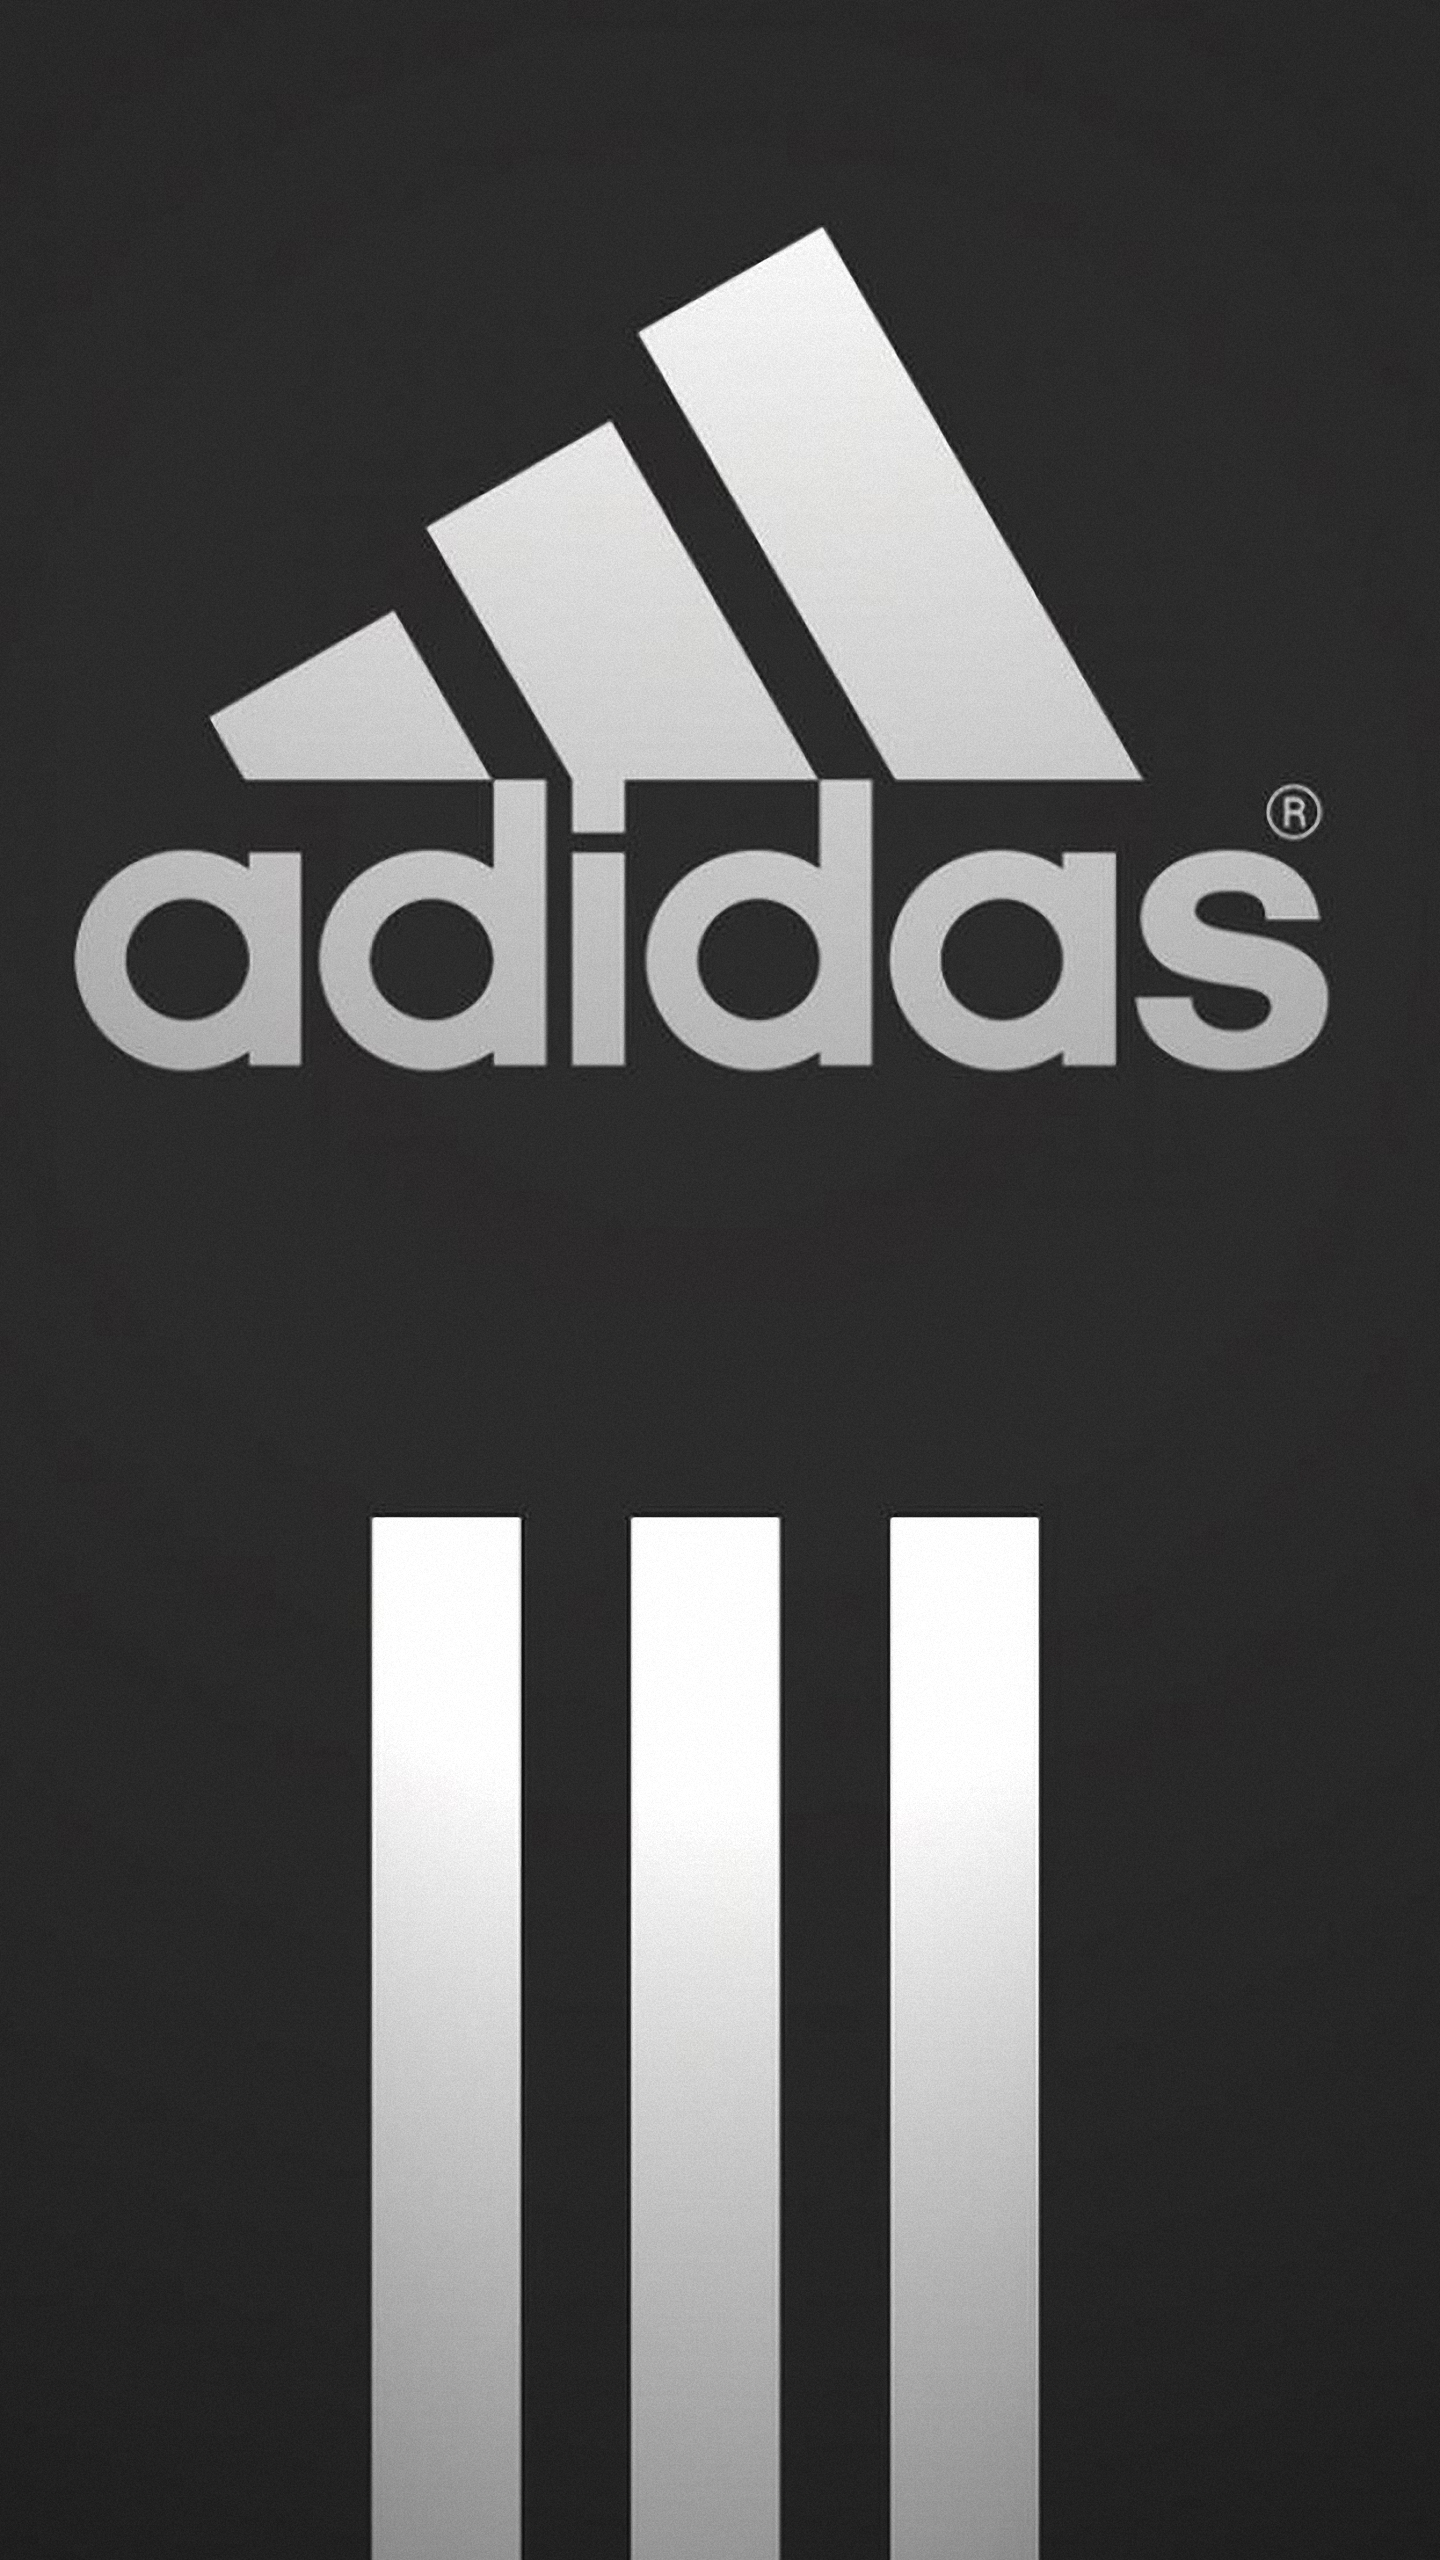 Adidas Logo Iphone 6 Wallpapers Hd - Adidas Wallpaper For Iphone 5 , HD Wallpaper & Backgrounds